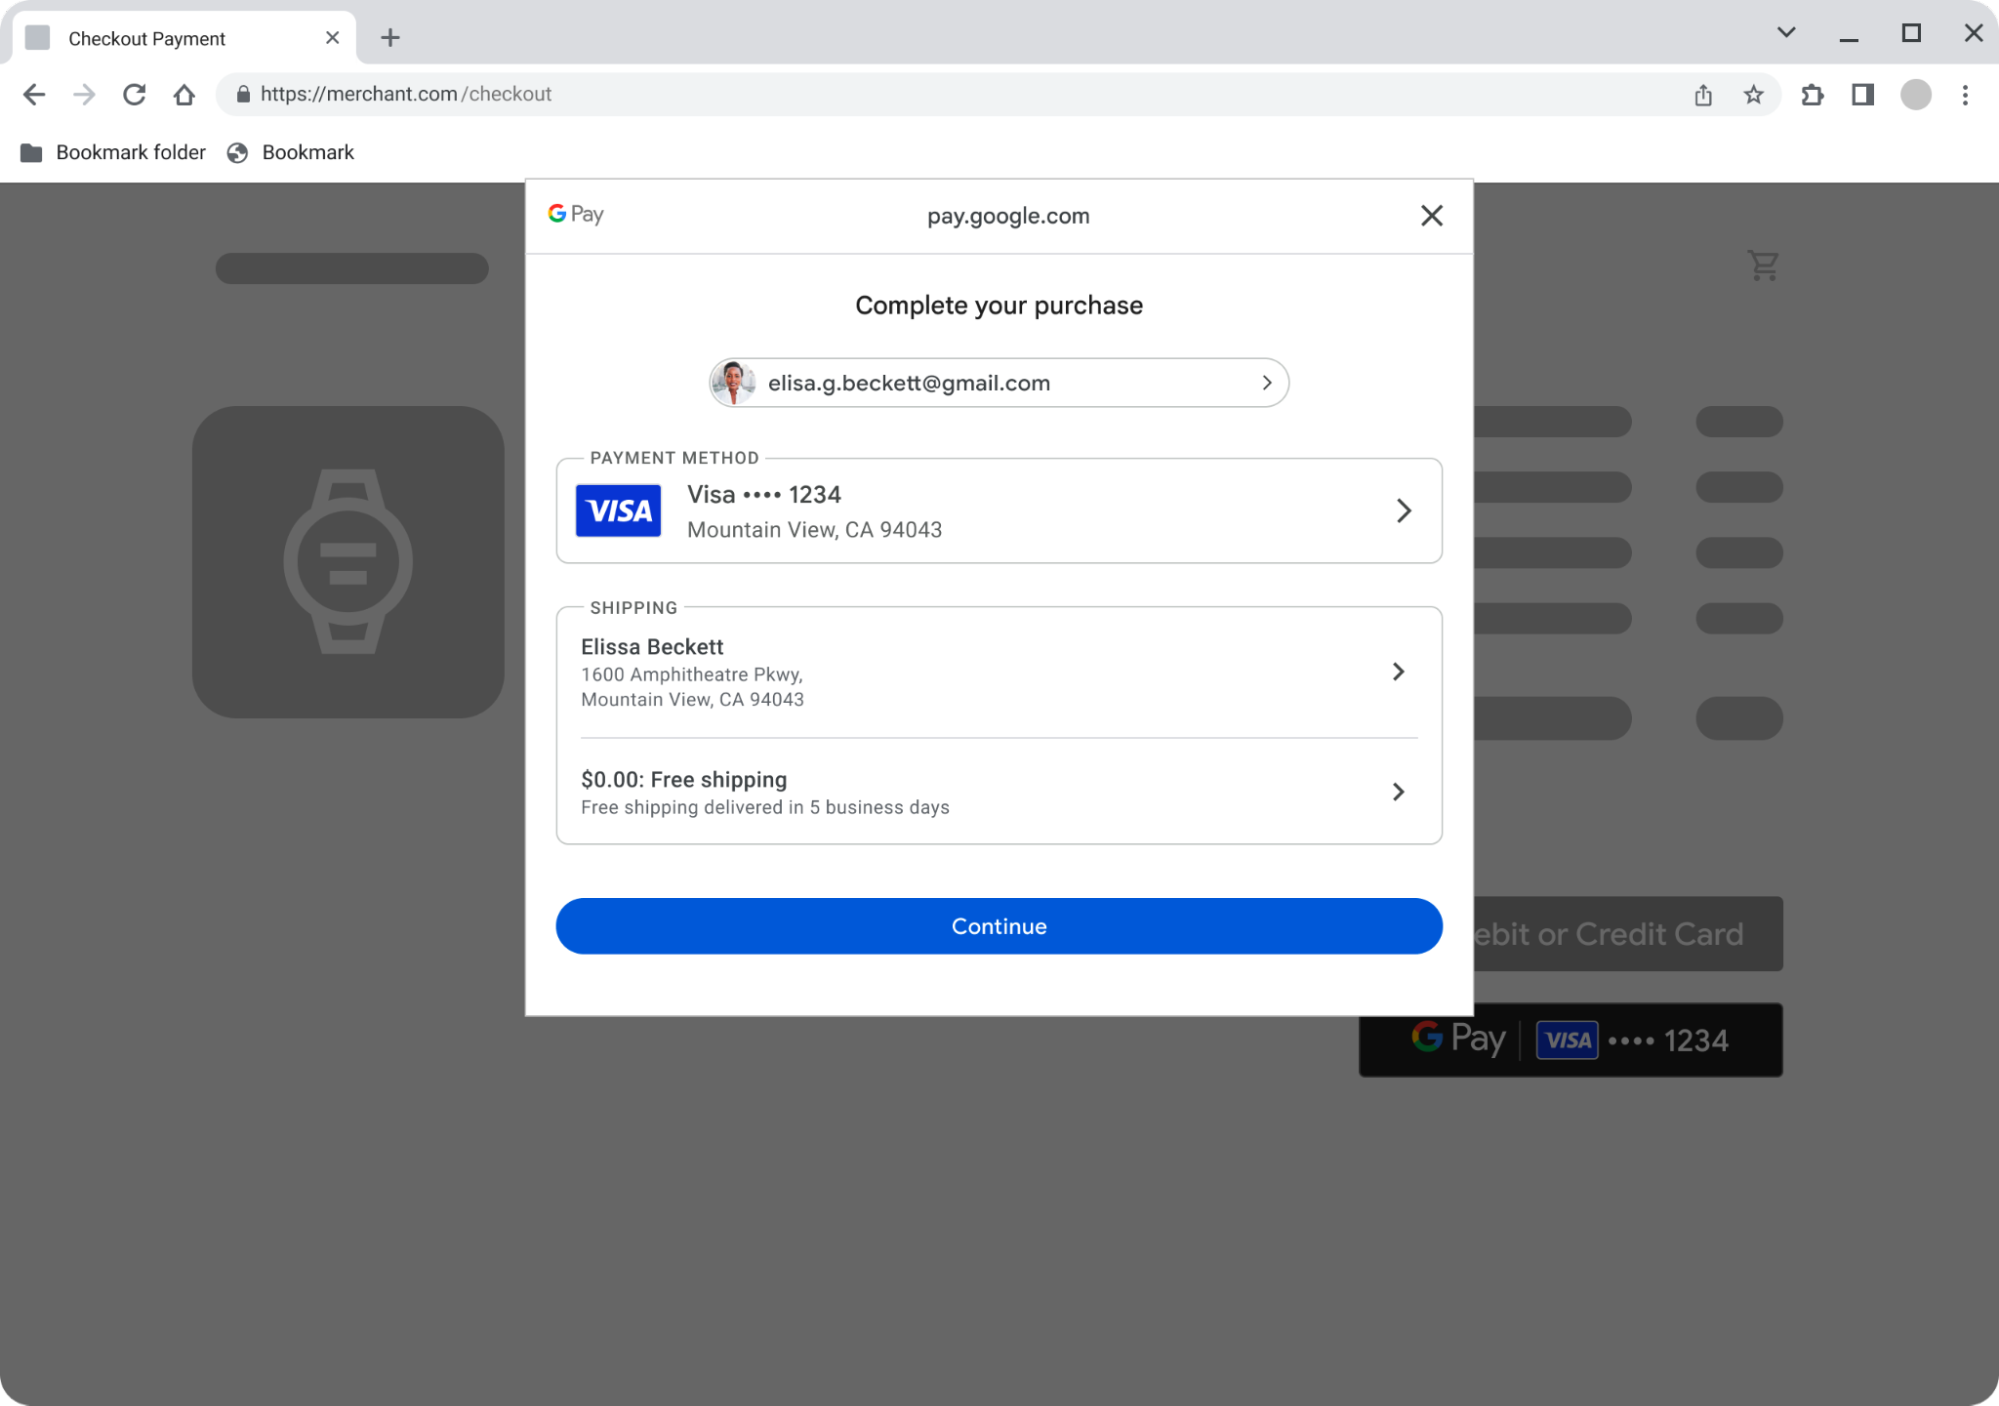 Google Pay displayed inside the new minimalistic Payment Handler window